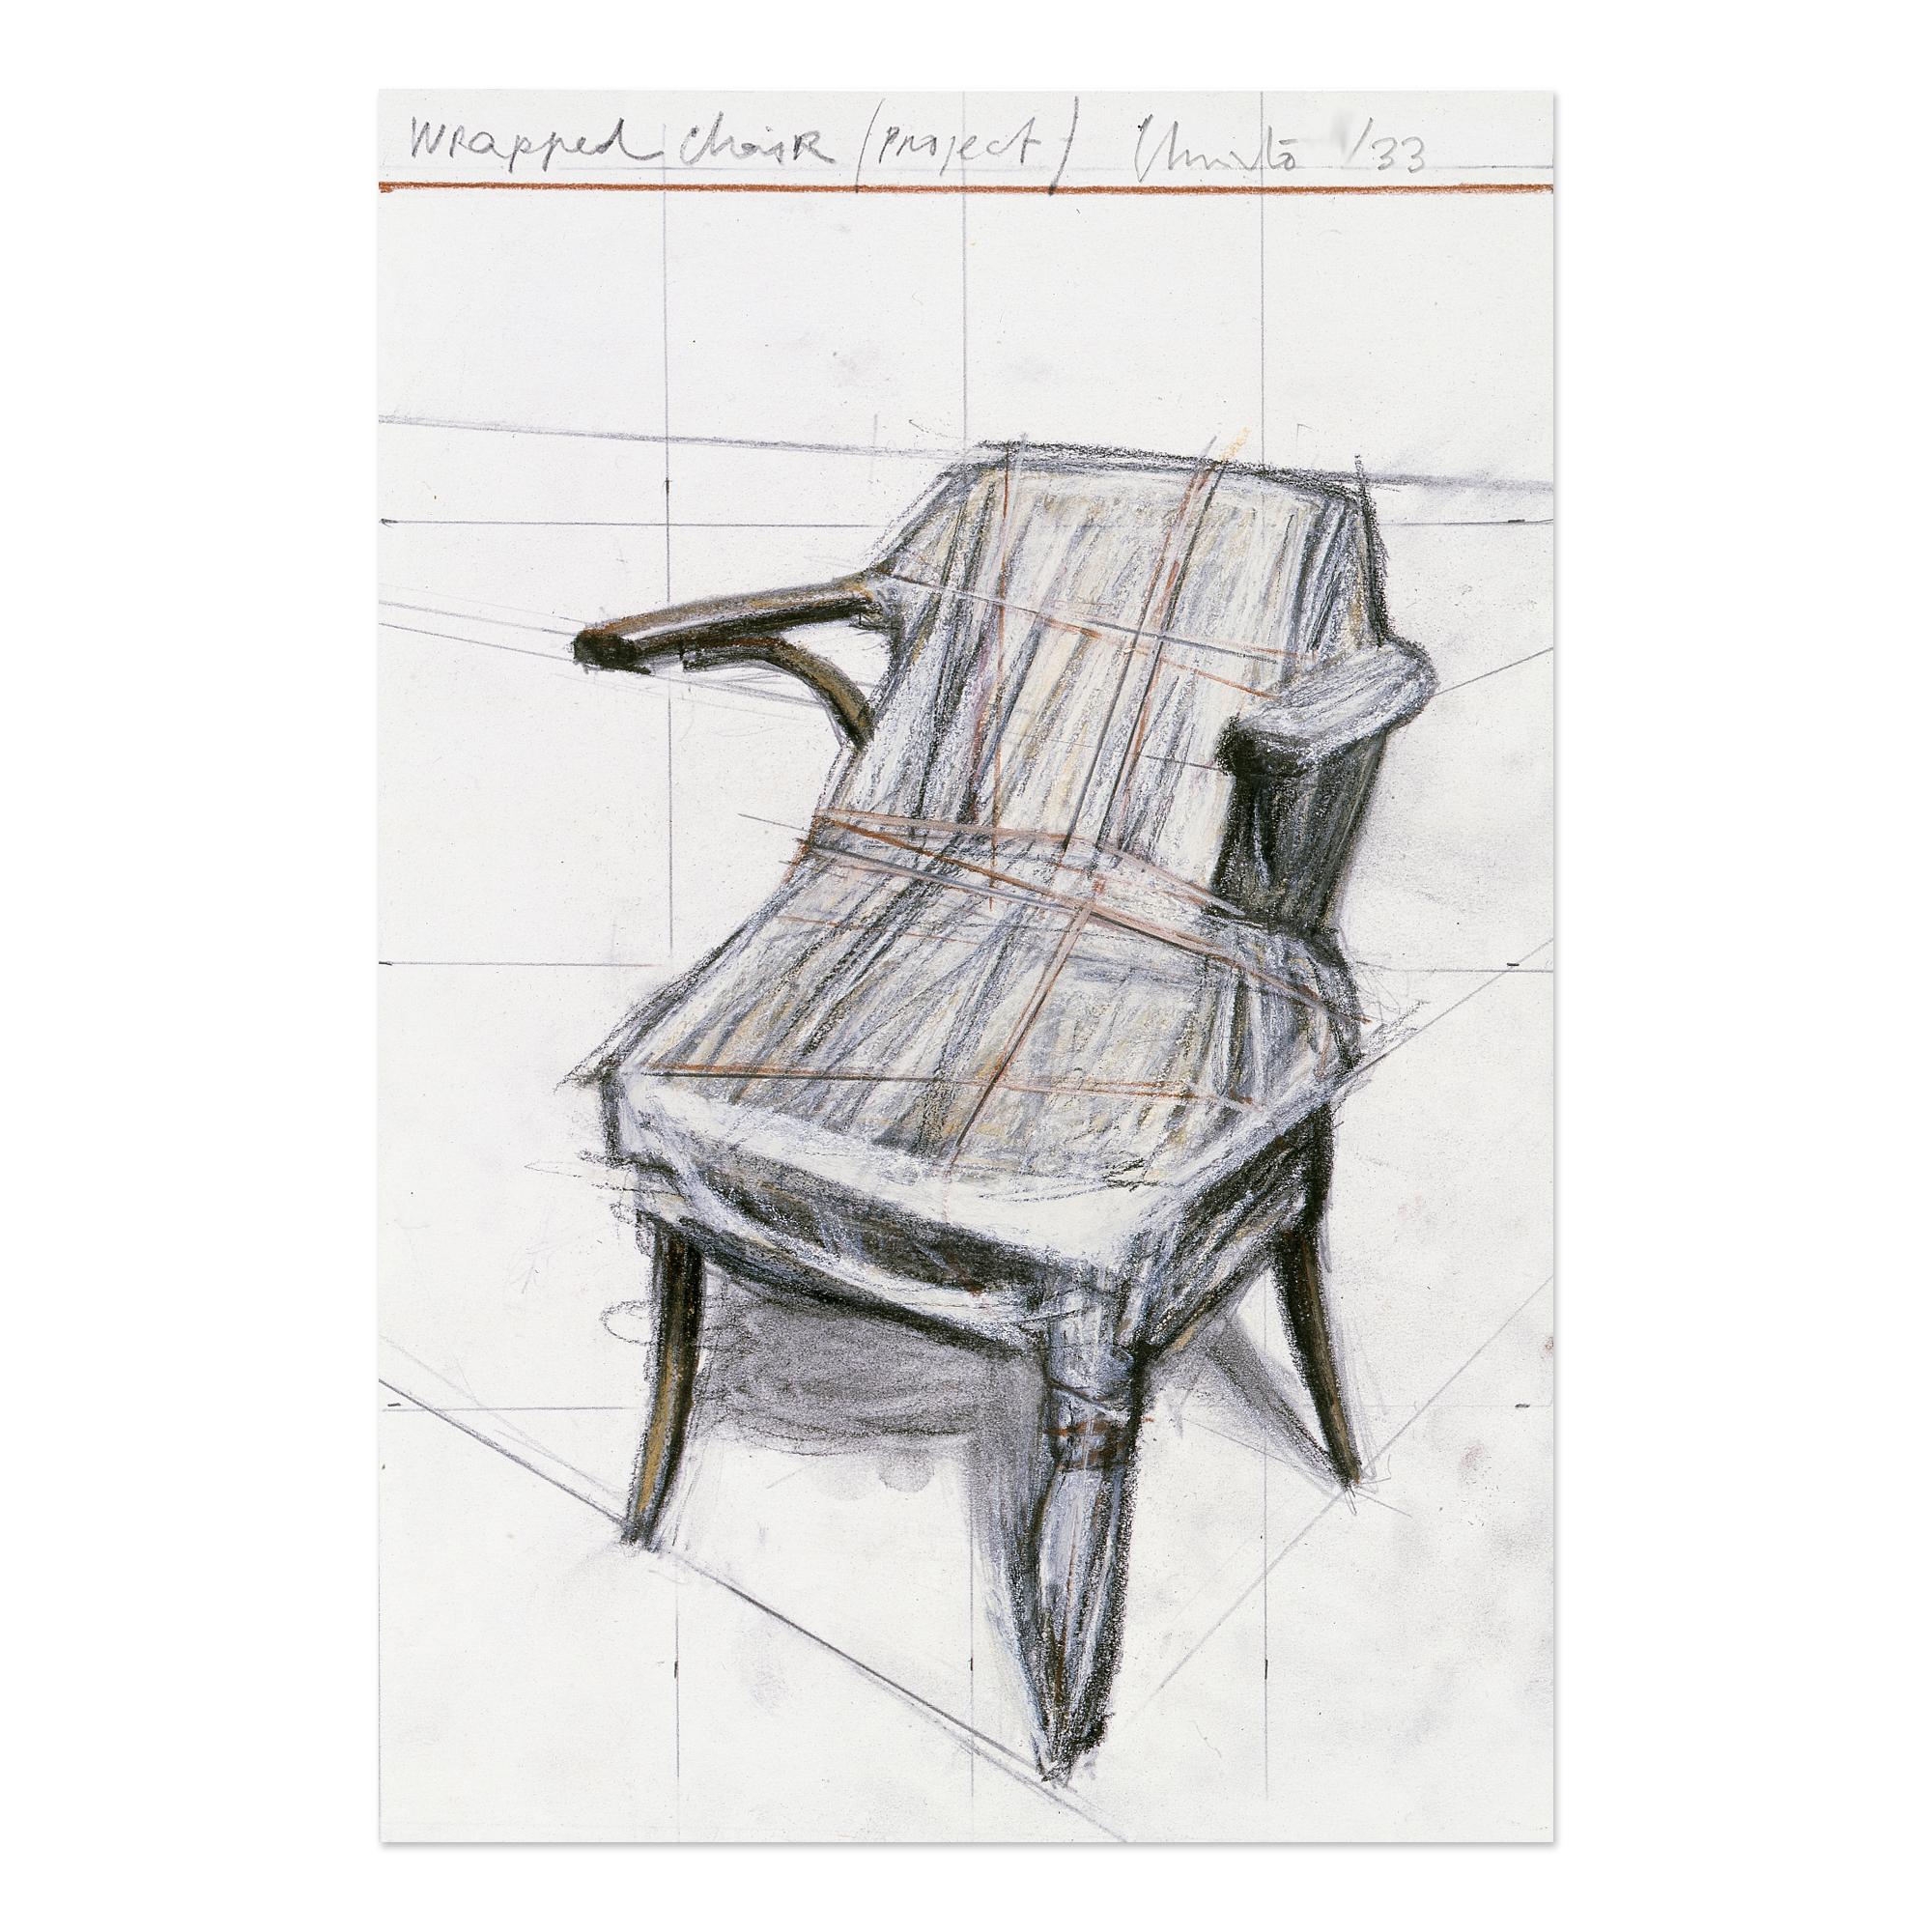 Christo and Jeanne-Claude Interior Print - Wrapped Chair (Project), Contemporary Art, Conceptual Art